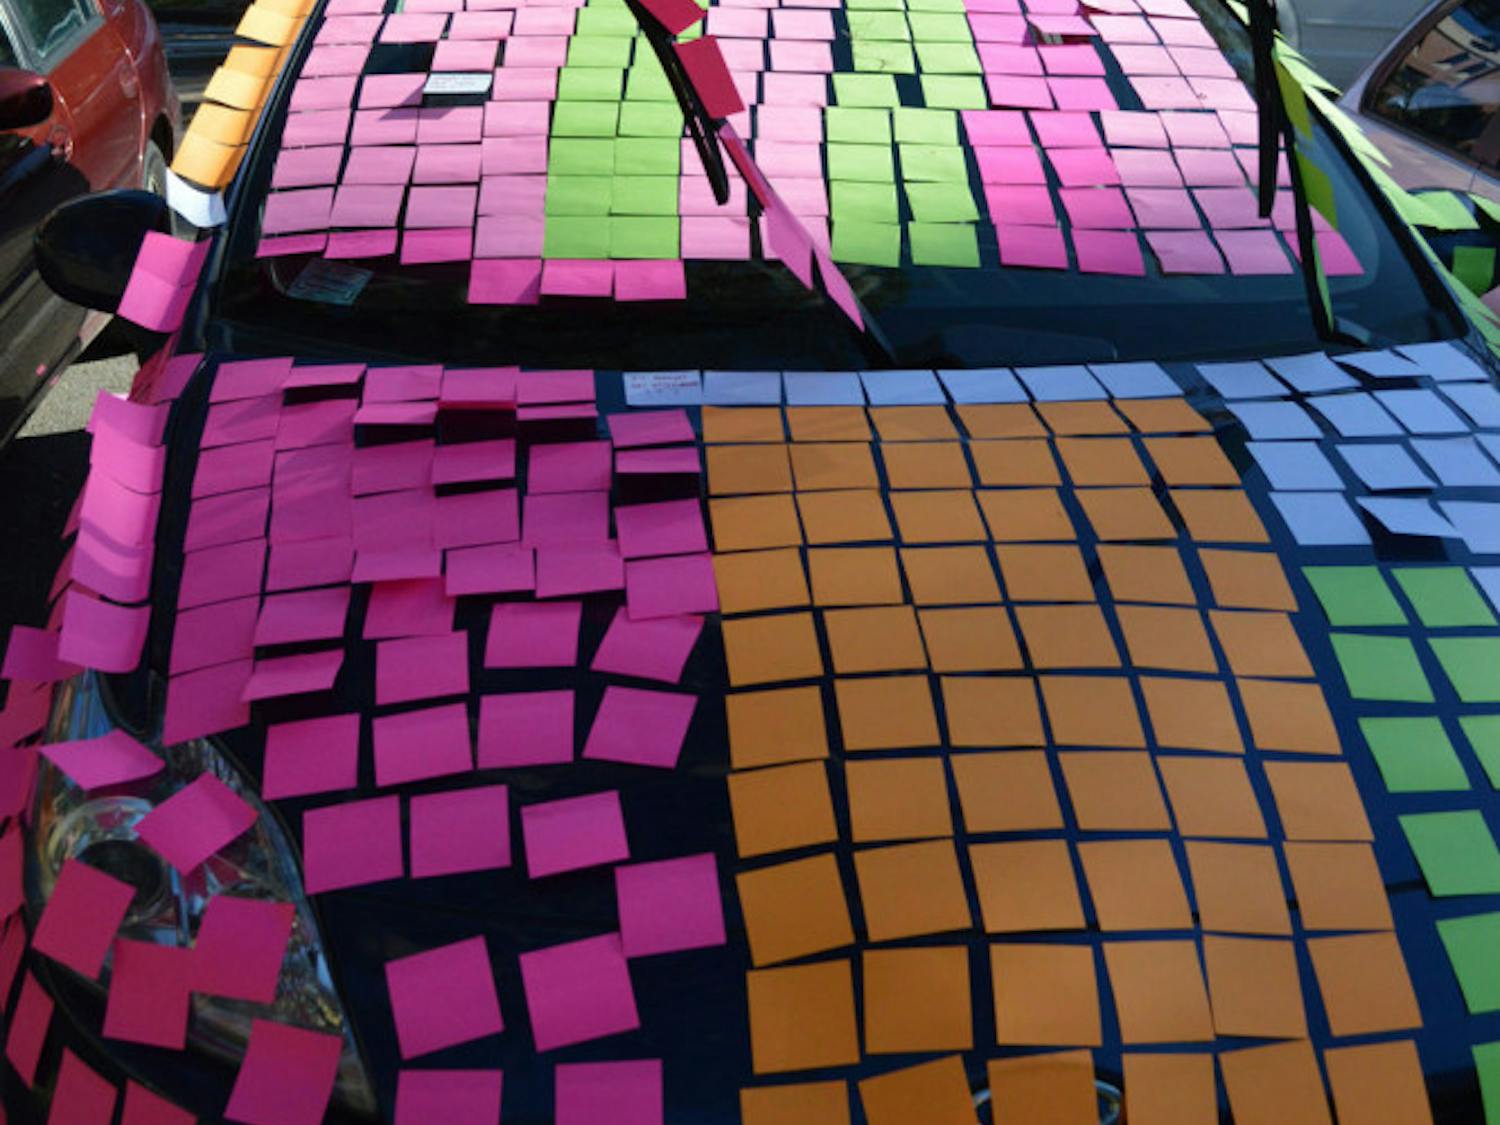 A car outside the Student Health Care Center was covered in sticky notes by UF Honors students as part of a prank on their adviser. They wrote jokes on sticky notes about the experience of being a freshman in the Honors program.